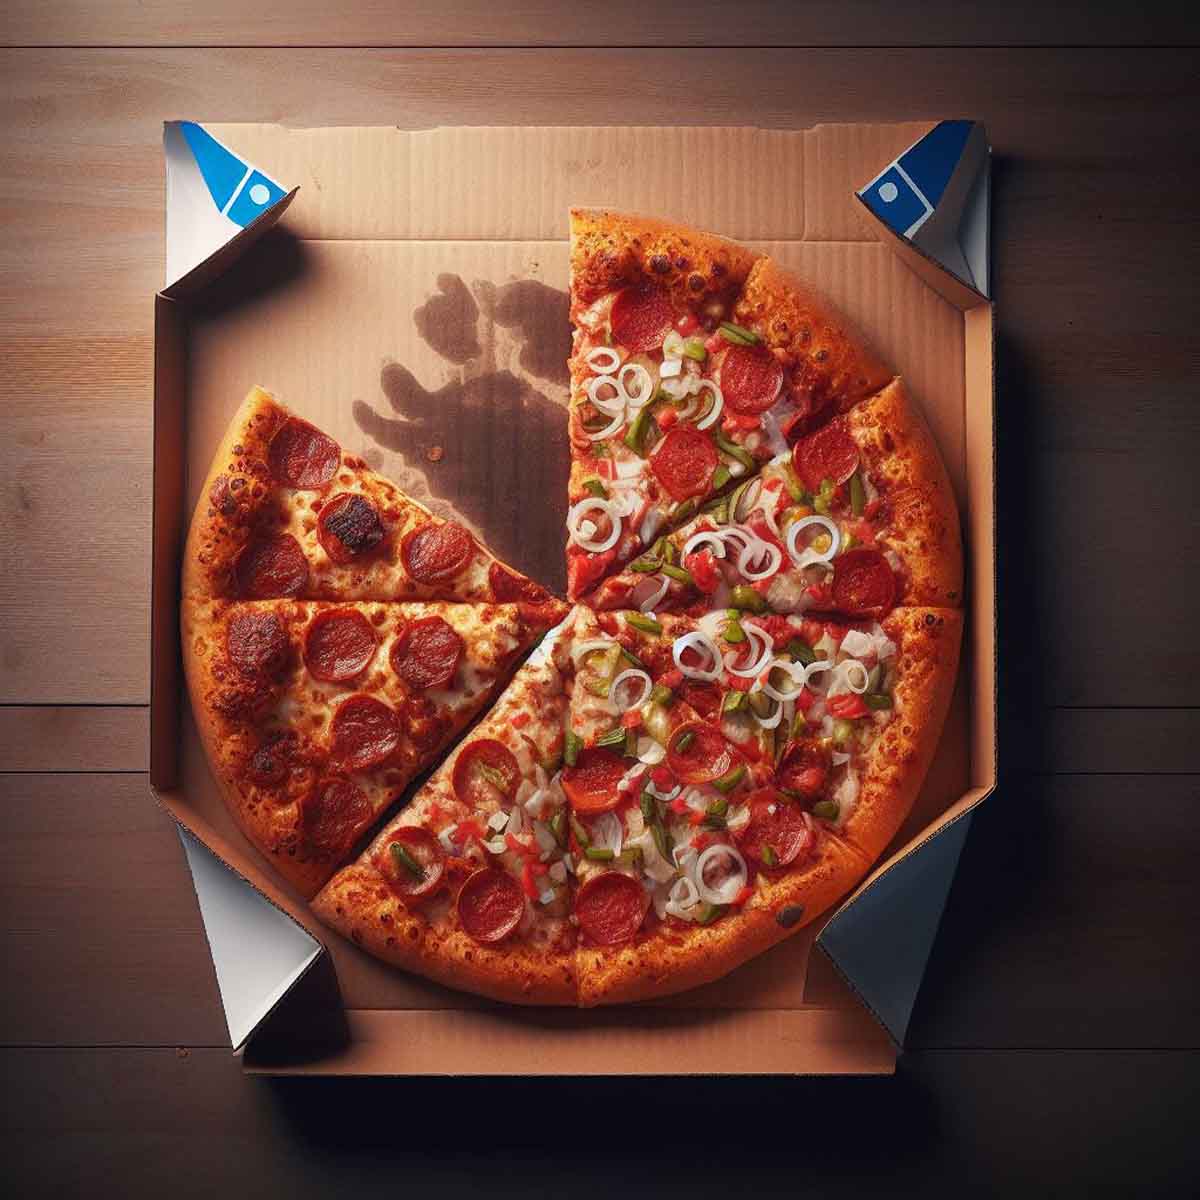 Half-eaten Domino's pizza in its box, showcasing a variety of toppings on a wooden table.